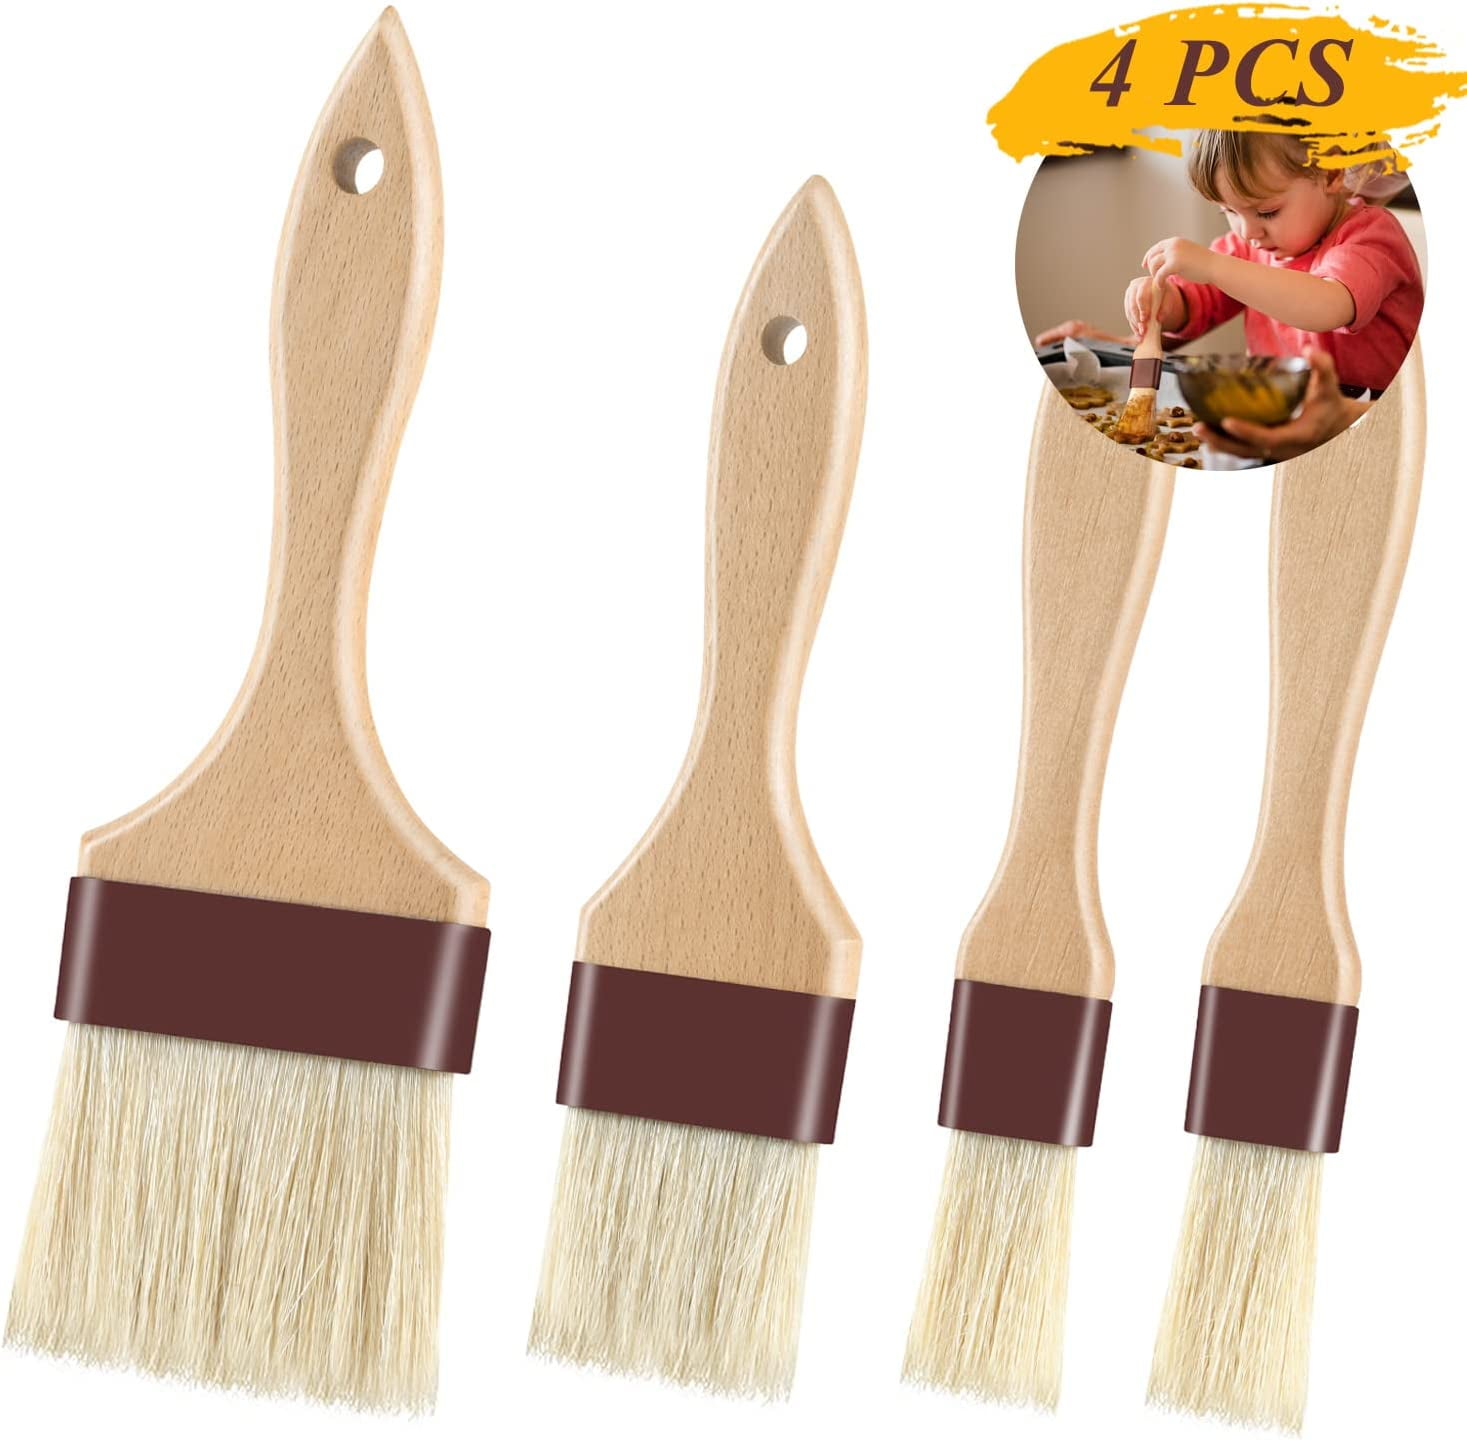 Alminionary 4Pcs Pastry Brushes Basting Oil Brush with Boar Bristles and  Hardwood Handles BBQ Cooking Baking Brush for Spreading Butter, Egg Liquid  to